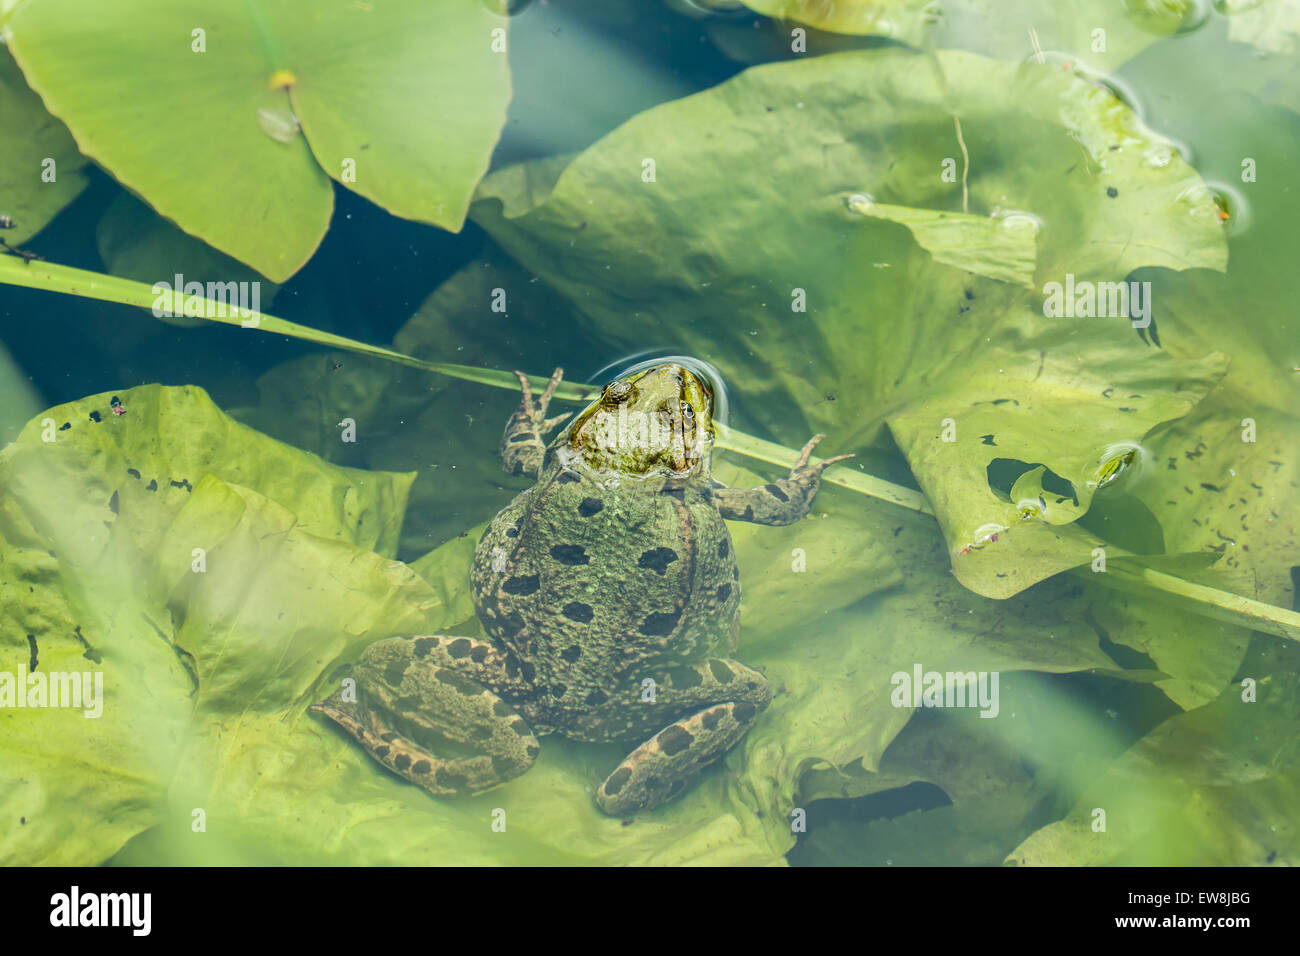 Marsh Frog resting on lily pad Stock Photo